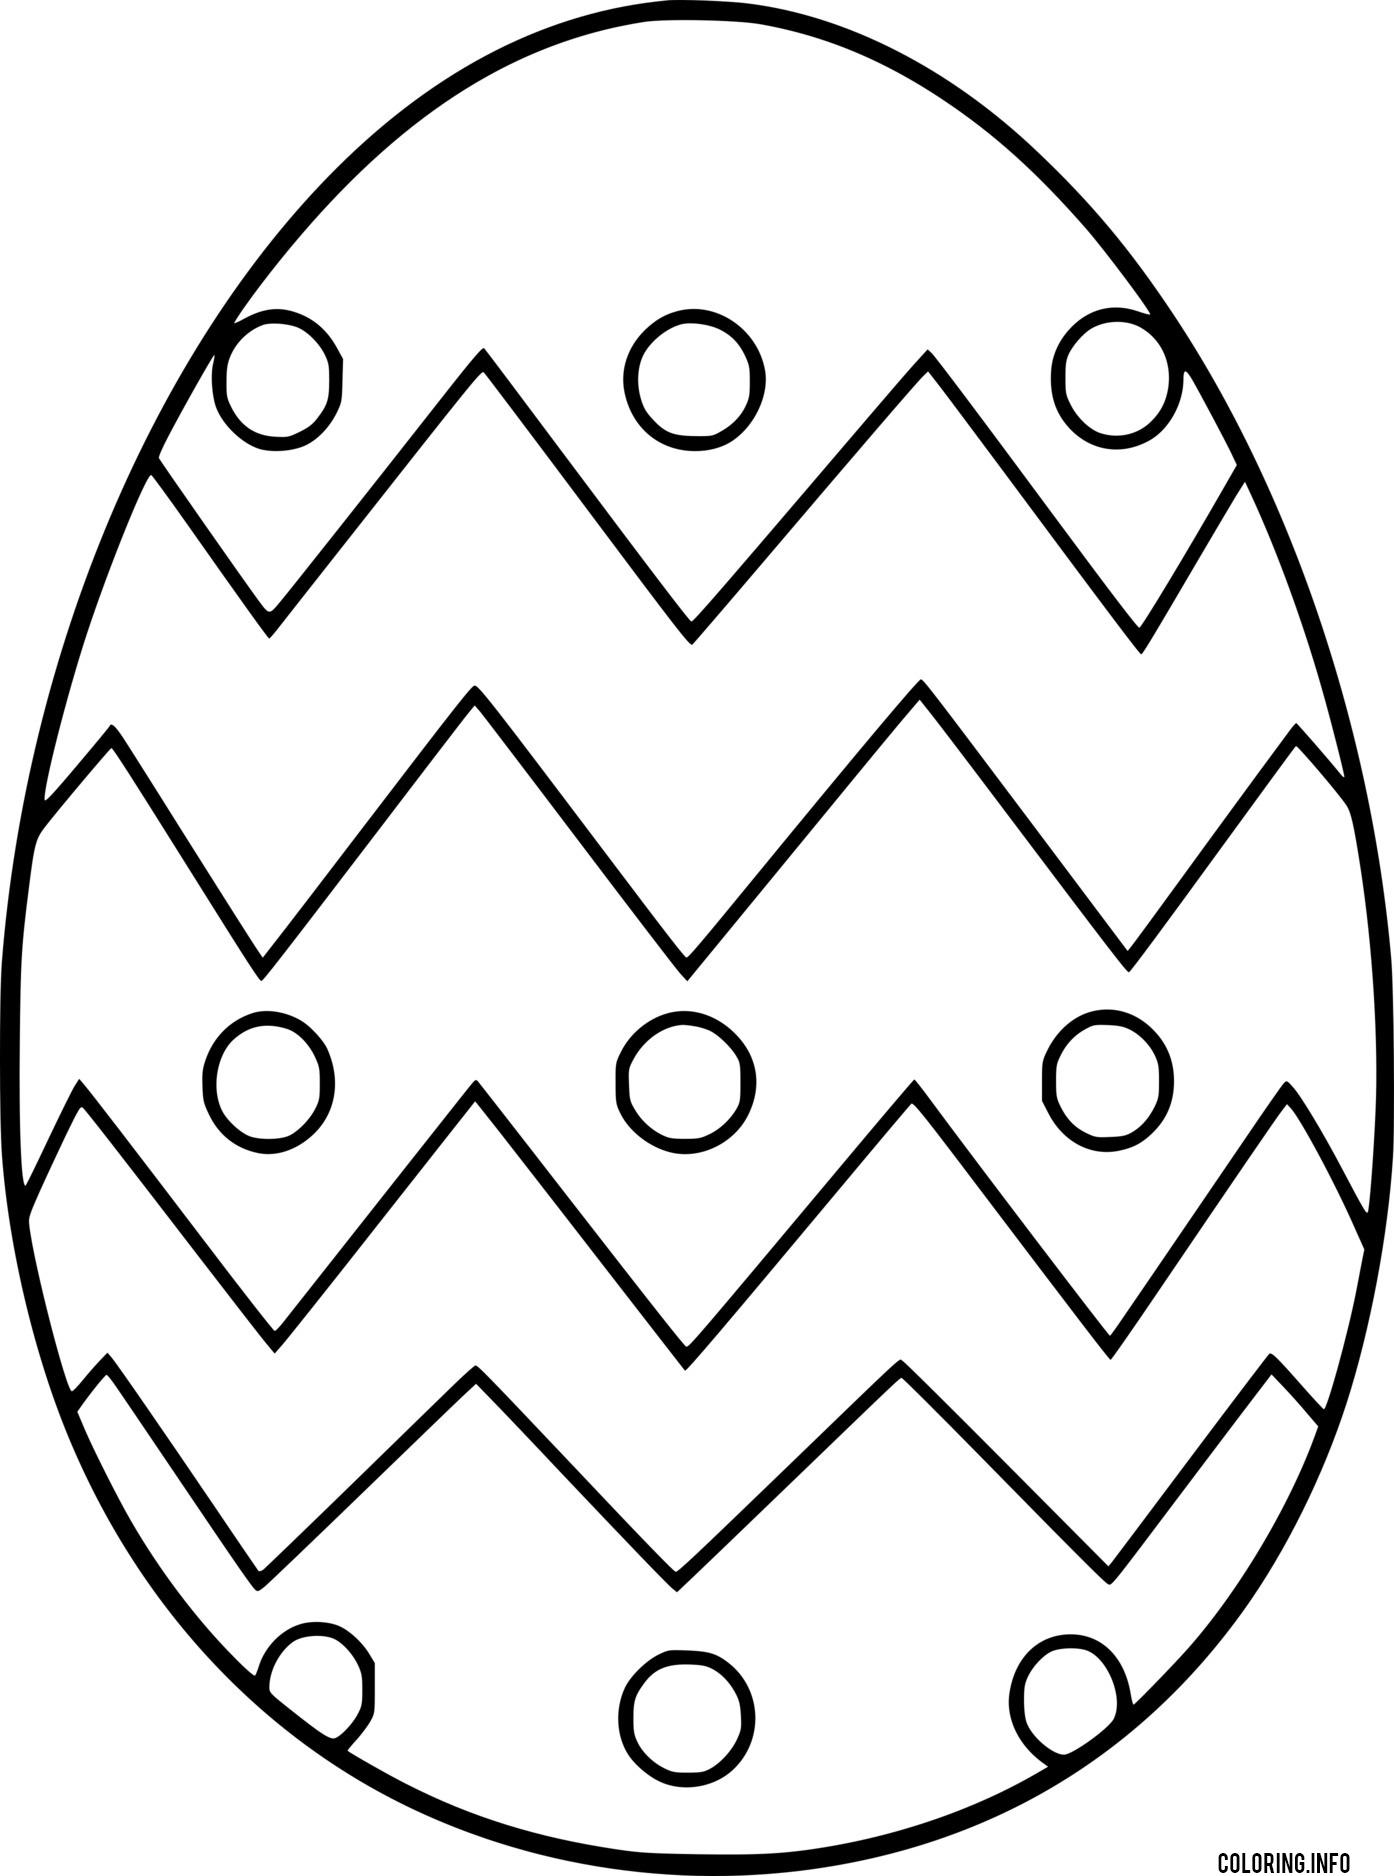 Easter Egg With Circle And Fold Line Patterns coloring